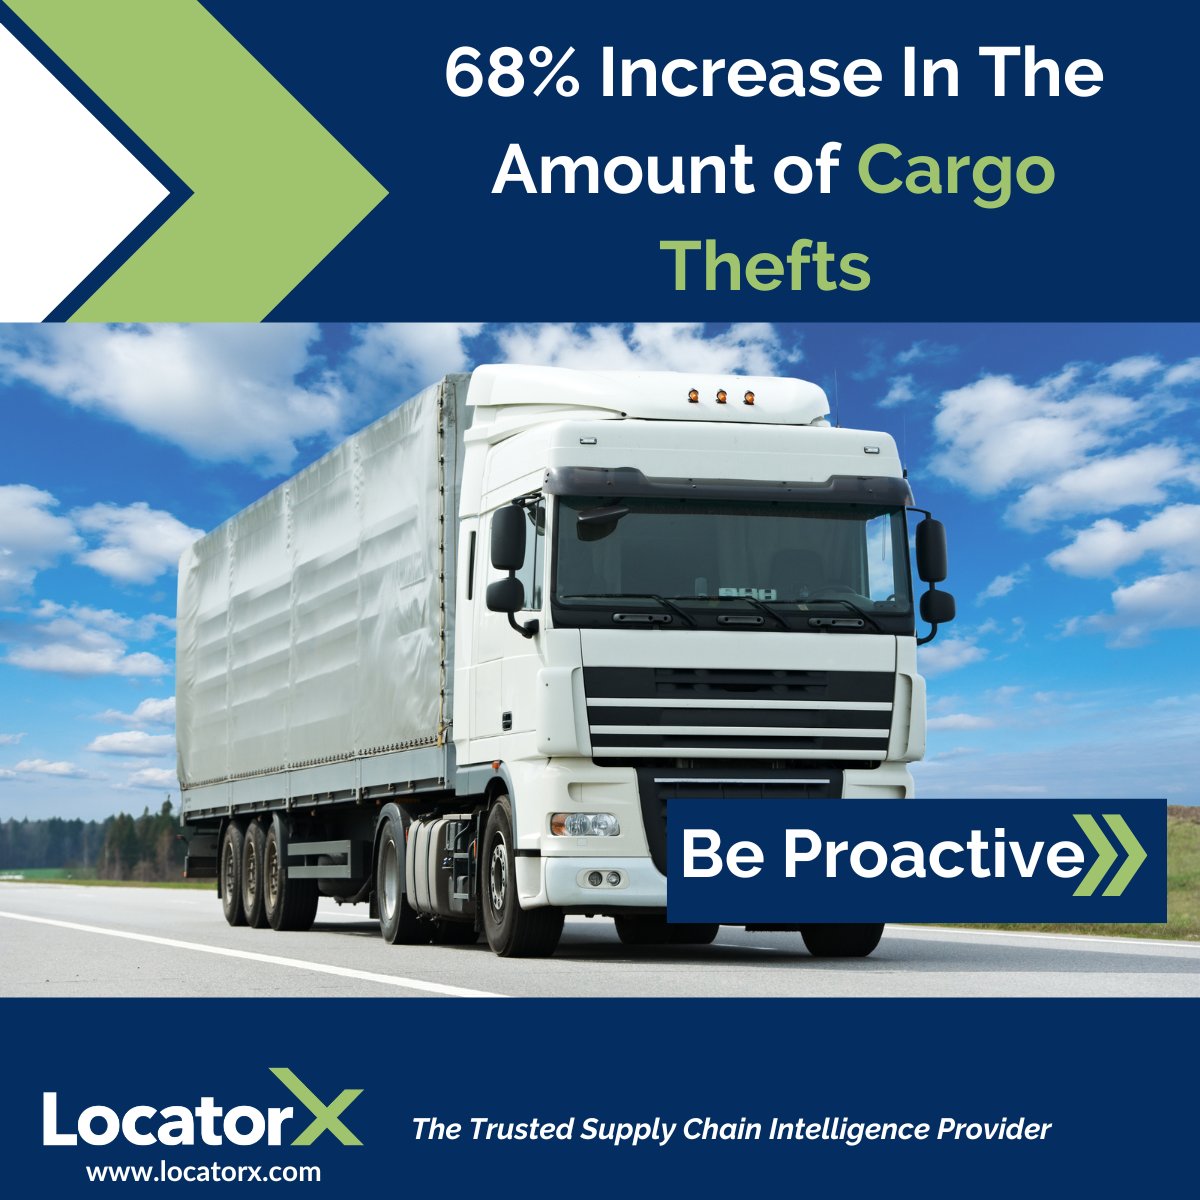 According to CargoNet, Q4 Y/Y thefts surged 68% in '23. We t𝐫𝐚𝐜𝐤 𝐚𝐭 𝐭𝐡𝐞 𝐩𝐚𝐜𝐤𝐚𝐠𝐞 𝐥𝐞𝐯𝐞𝐥 not the truck level. 

Knowing where the truck is, is only half the battle. We help you win the other half. 

Learn More> bit.ly/3SUO7xe

#SupplyChain #cargotheft